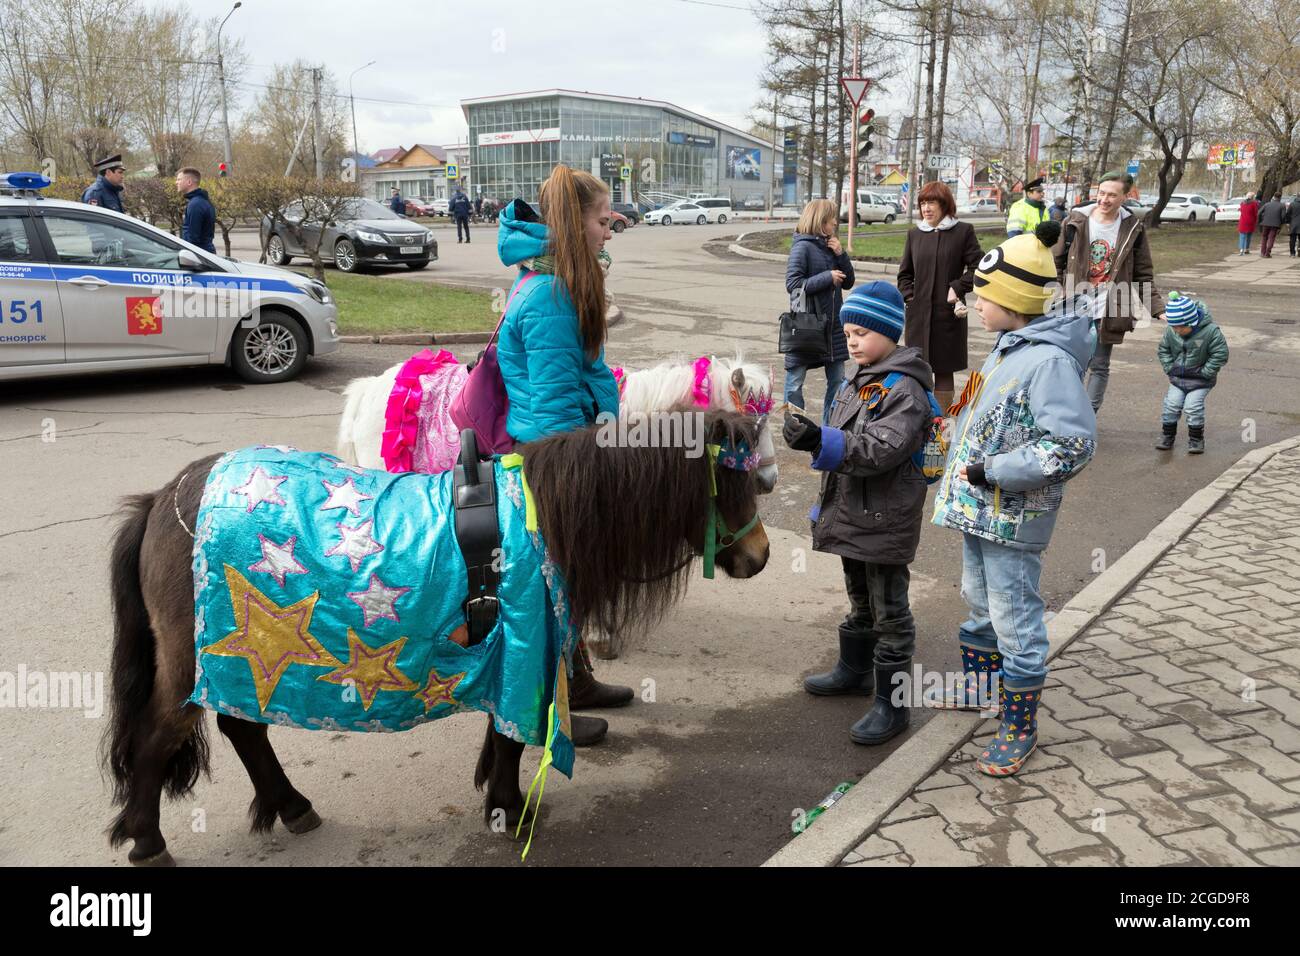 The boys stared at the elegant pony for riding, under the supervision of a girlon the background of a police car Stock Photo